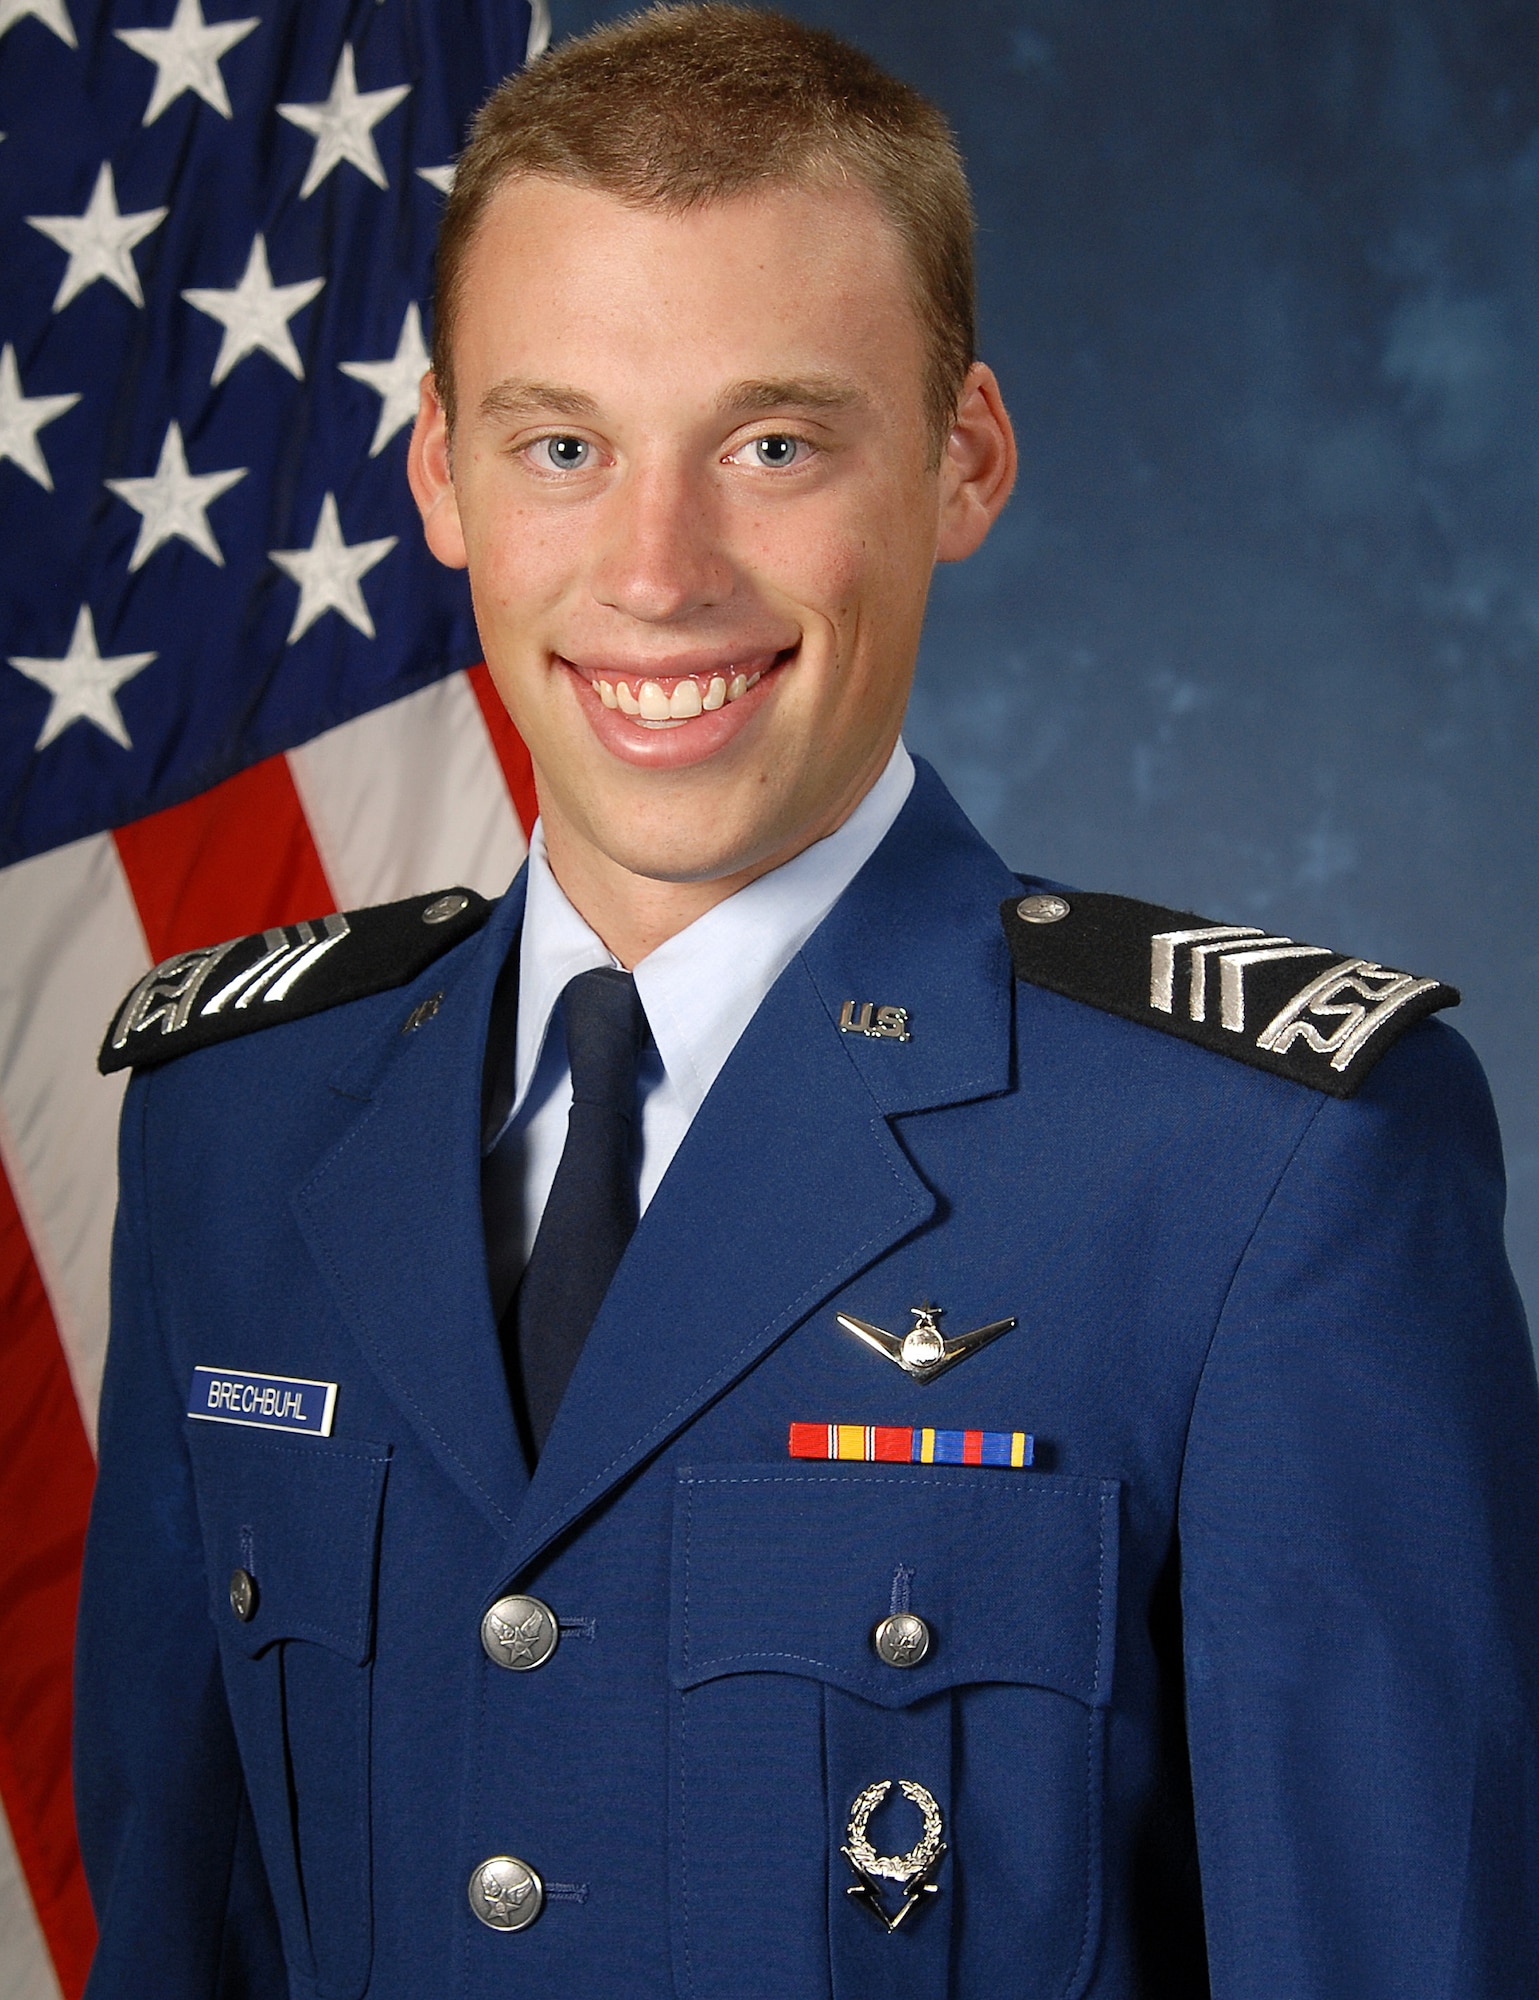 Cadet Christian Brechbuhl is assigned to Cadet Squadron 31 at the Air Force Academy in Colorado Springs, Colo. (U.S. Air Force photo)